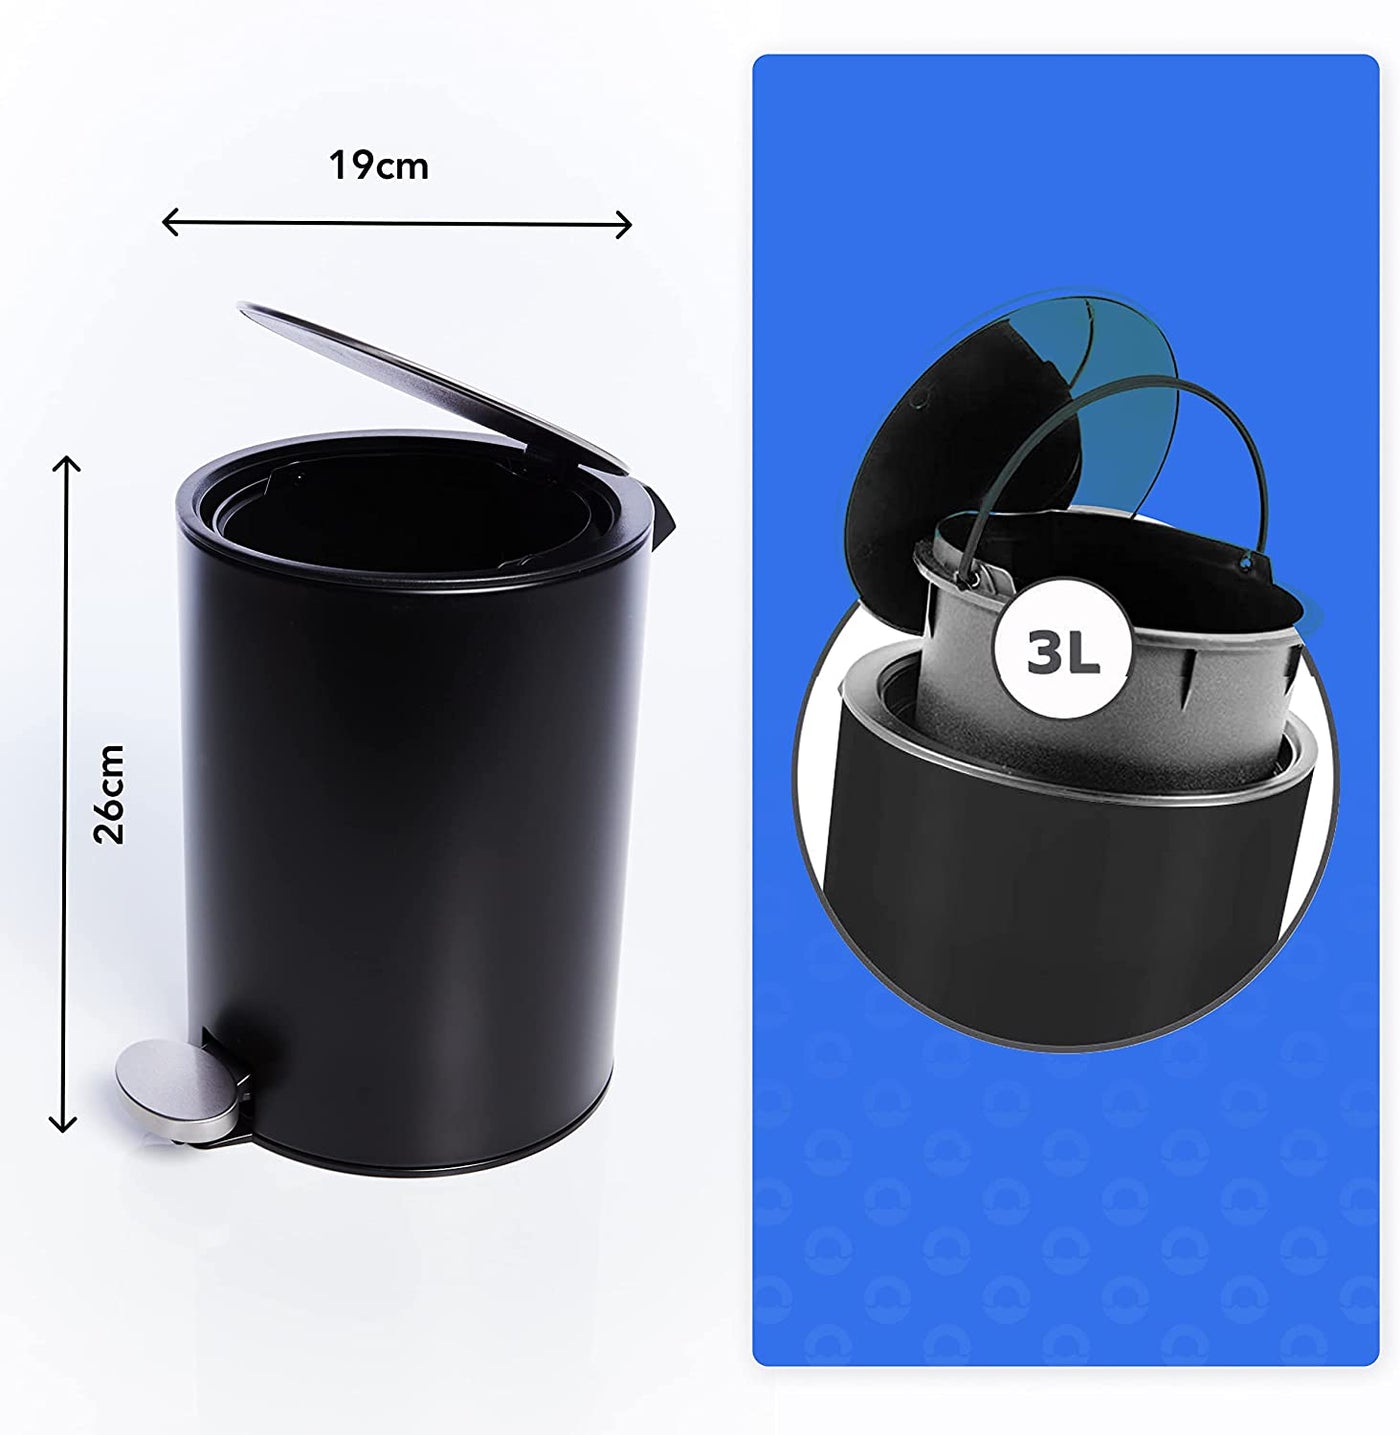 Bathroom Trash Can: 3L Stainless Steel Bucket with Softclose System